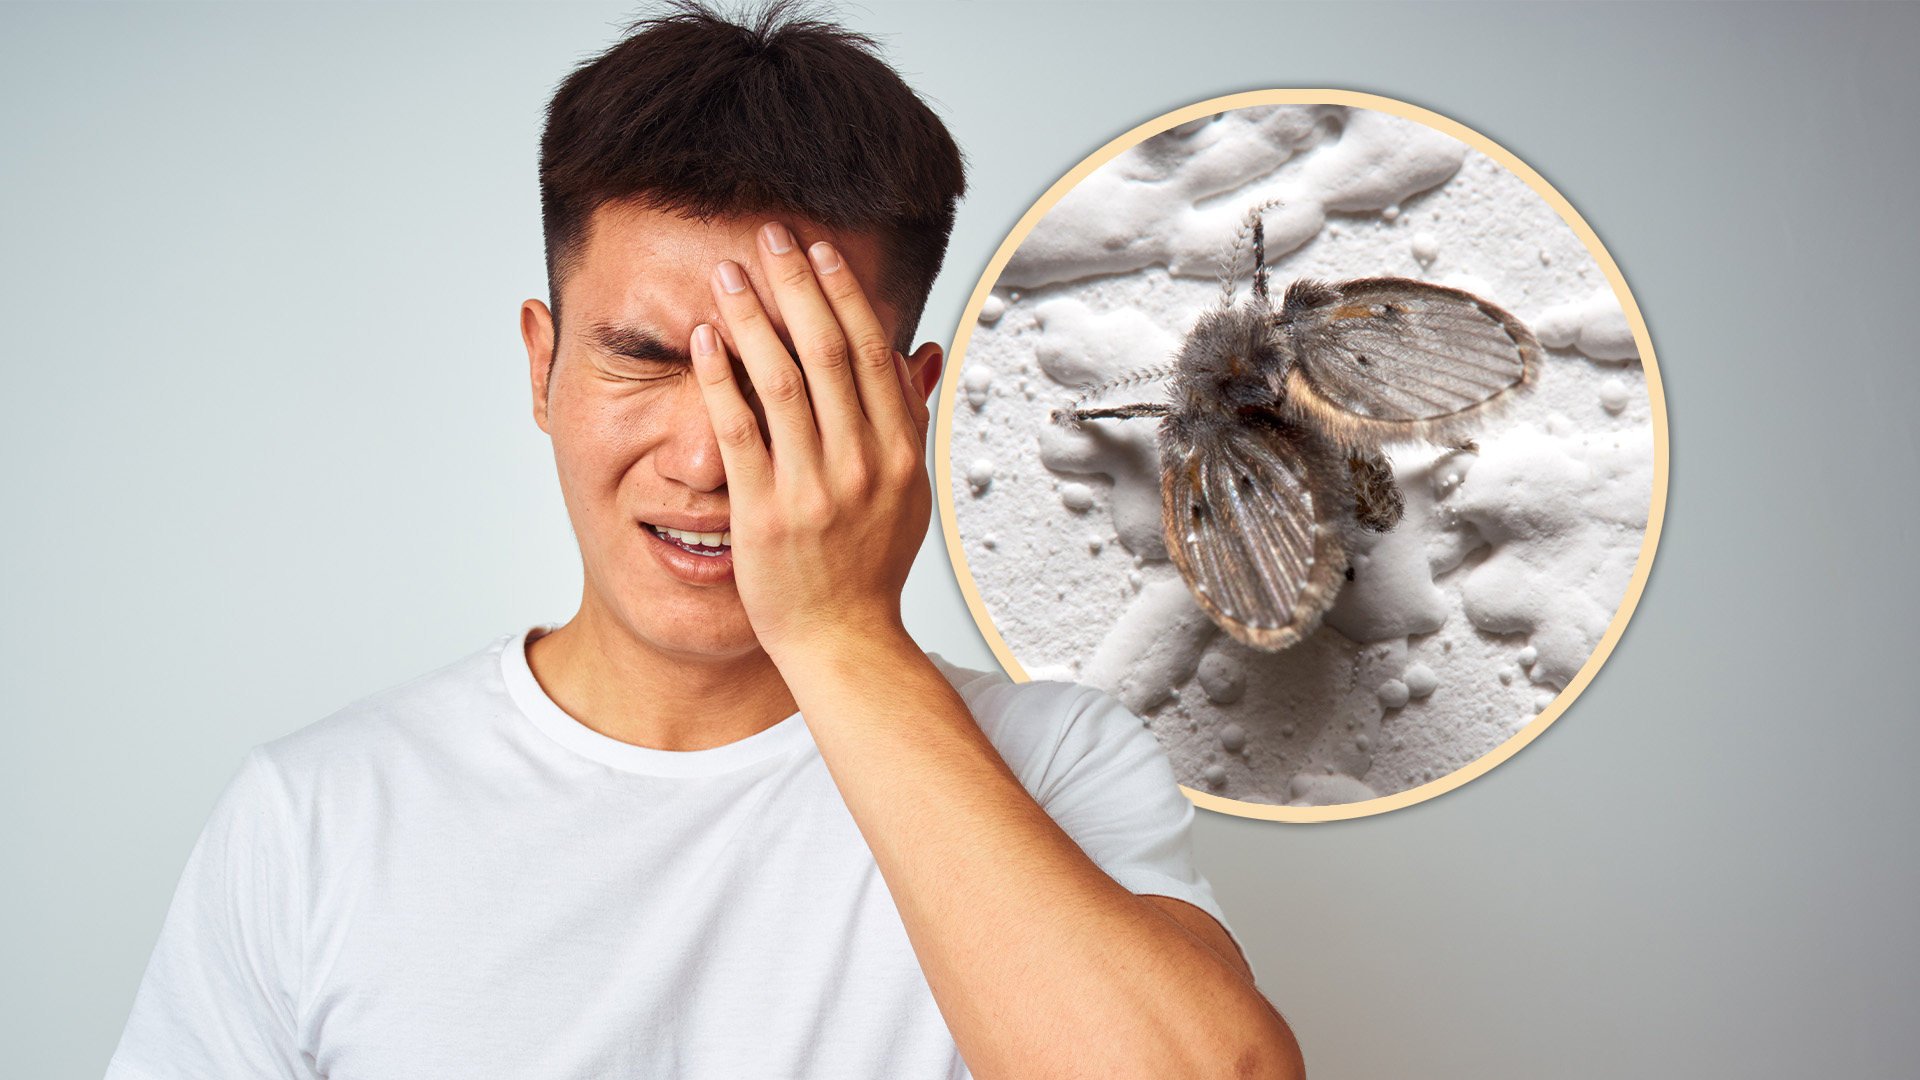 Surgeons in China were forced to remove the eyeball of a man after residue bacteria from an insect he swatted to death on his face threatened to seep into his brain. Photo: SCMP composite/Shutterstock